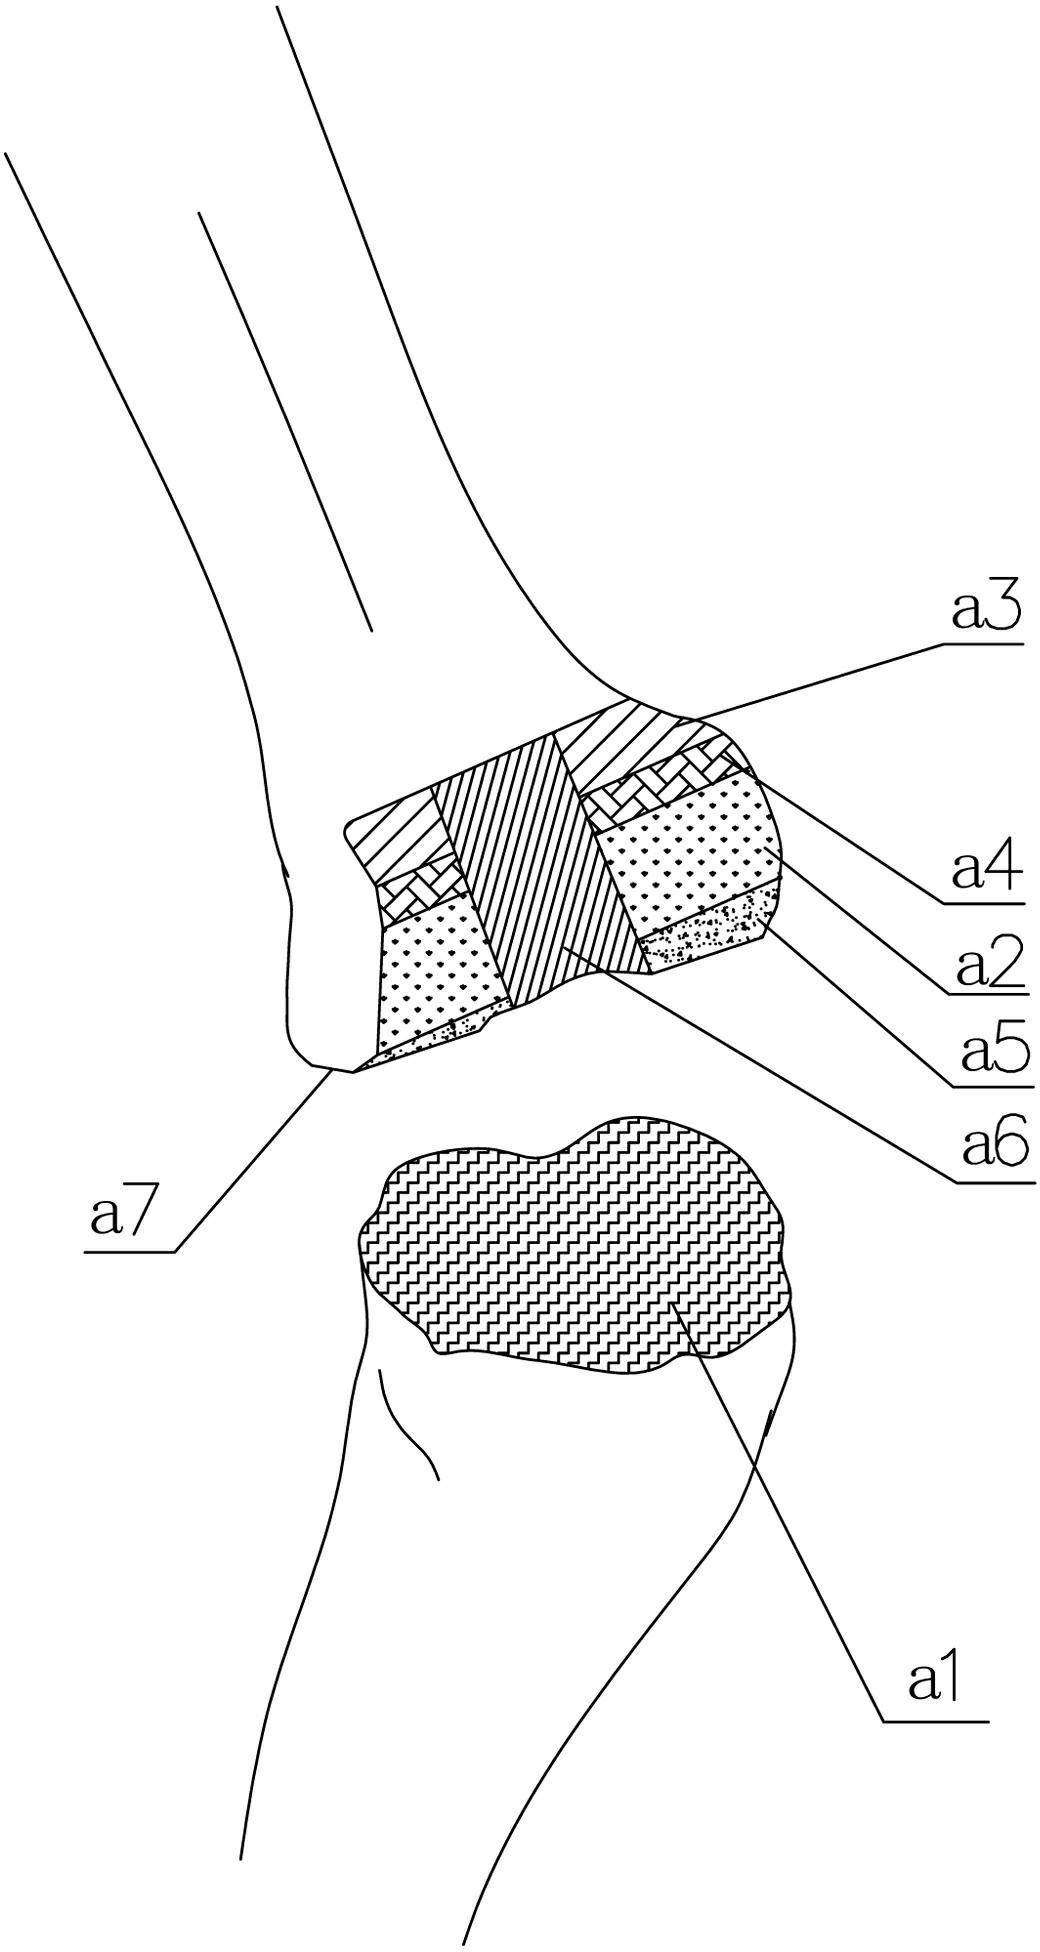 Positioning and bone-cutting system used for minimally invasive artificial knee joint replacement